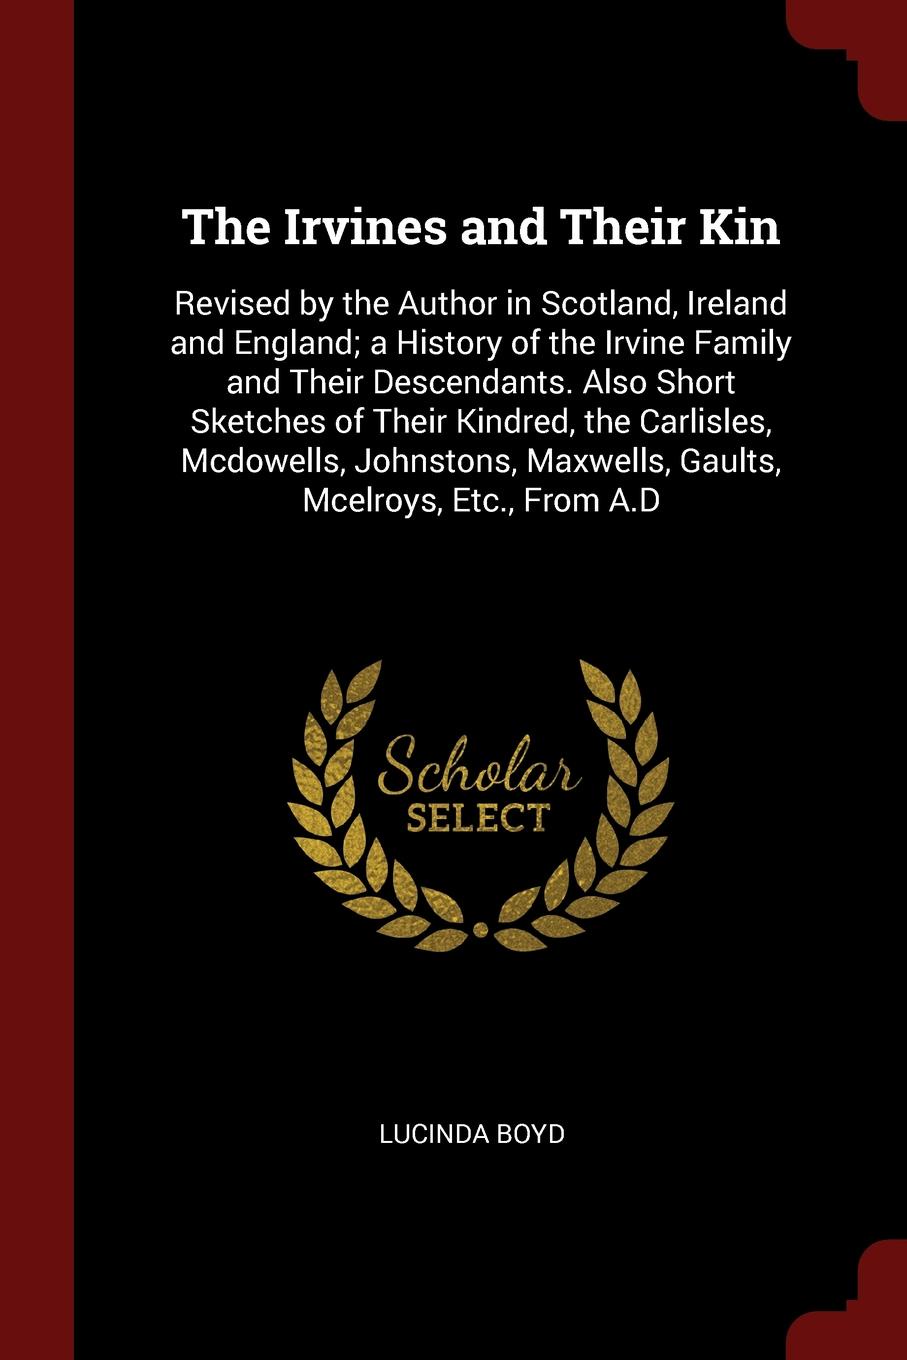 The Irvines and Their Kin. Revised by the Author in Scotland, Ireland and England; a History of the Irvine Family and Their Descendants. Also Short Sketches of Their Kindred, the Carlisles, Mcdowells, Johnstons, Maxwells, Gaults, Mcelroys, Etc., F...